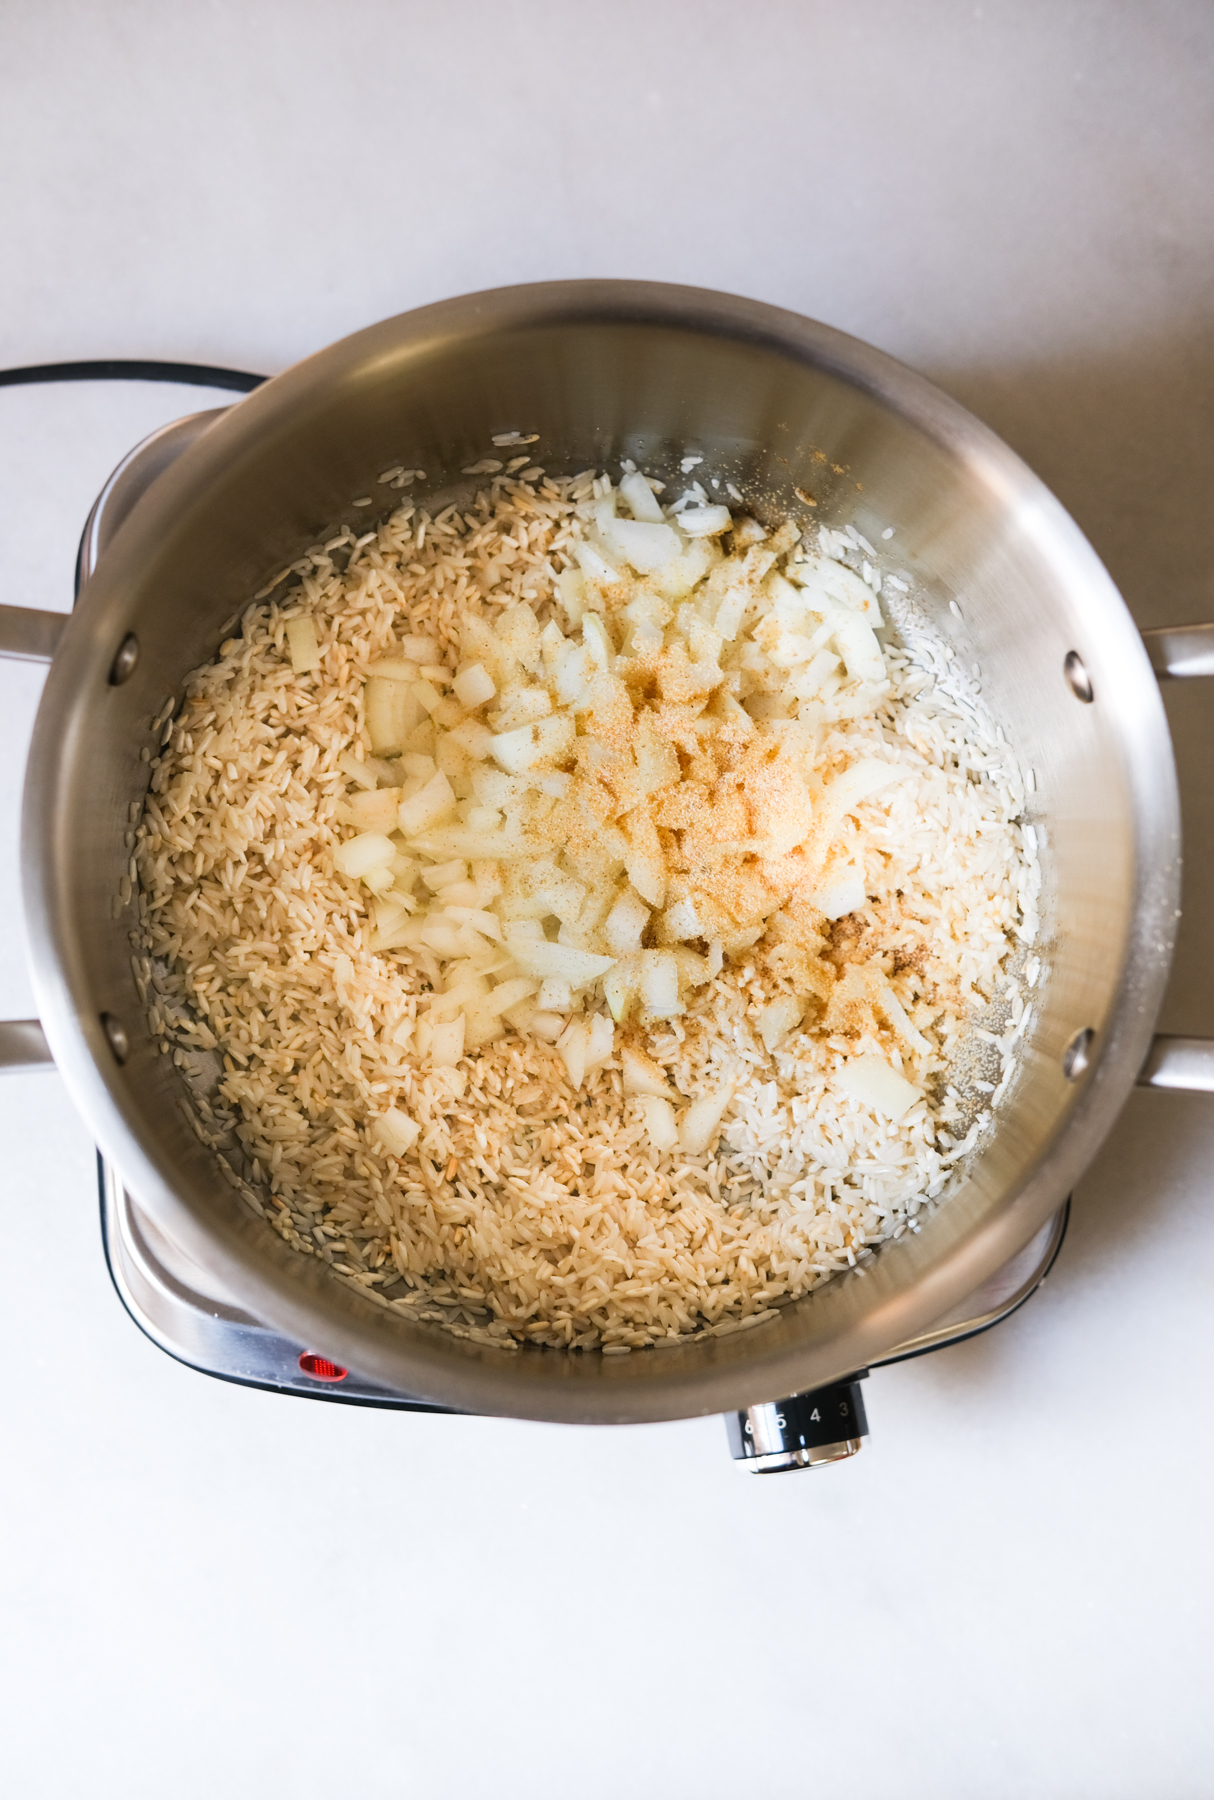 adding in onions and seasoning with pre-cooked rice for Mexican rice